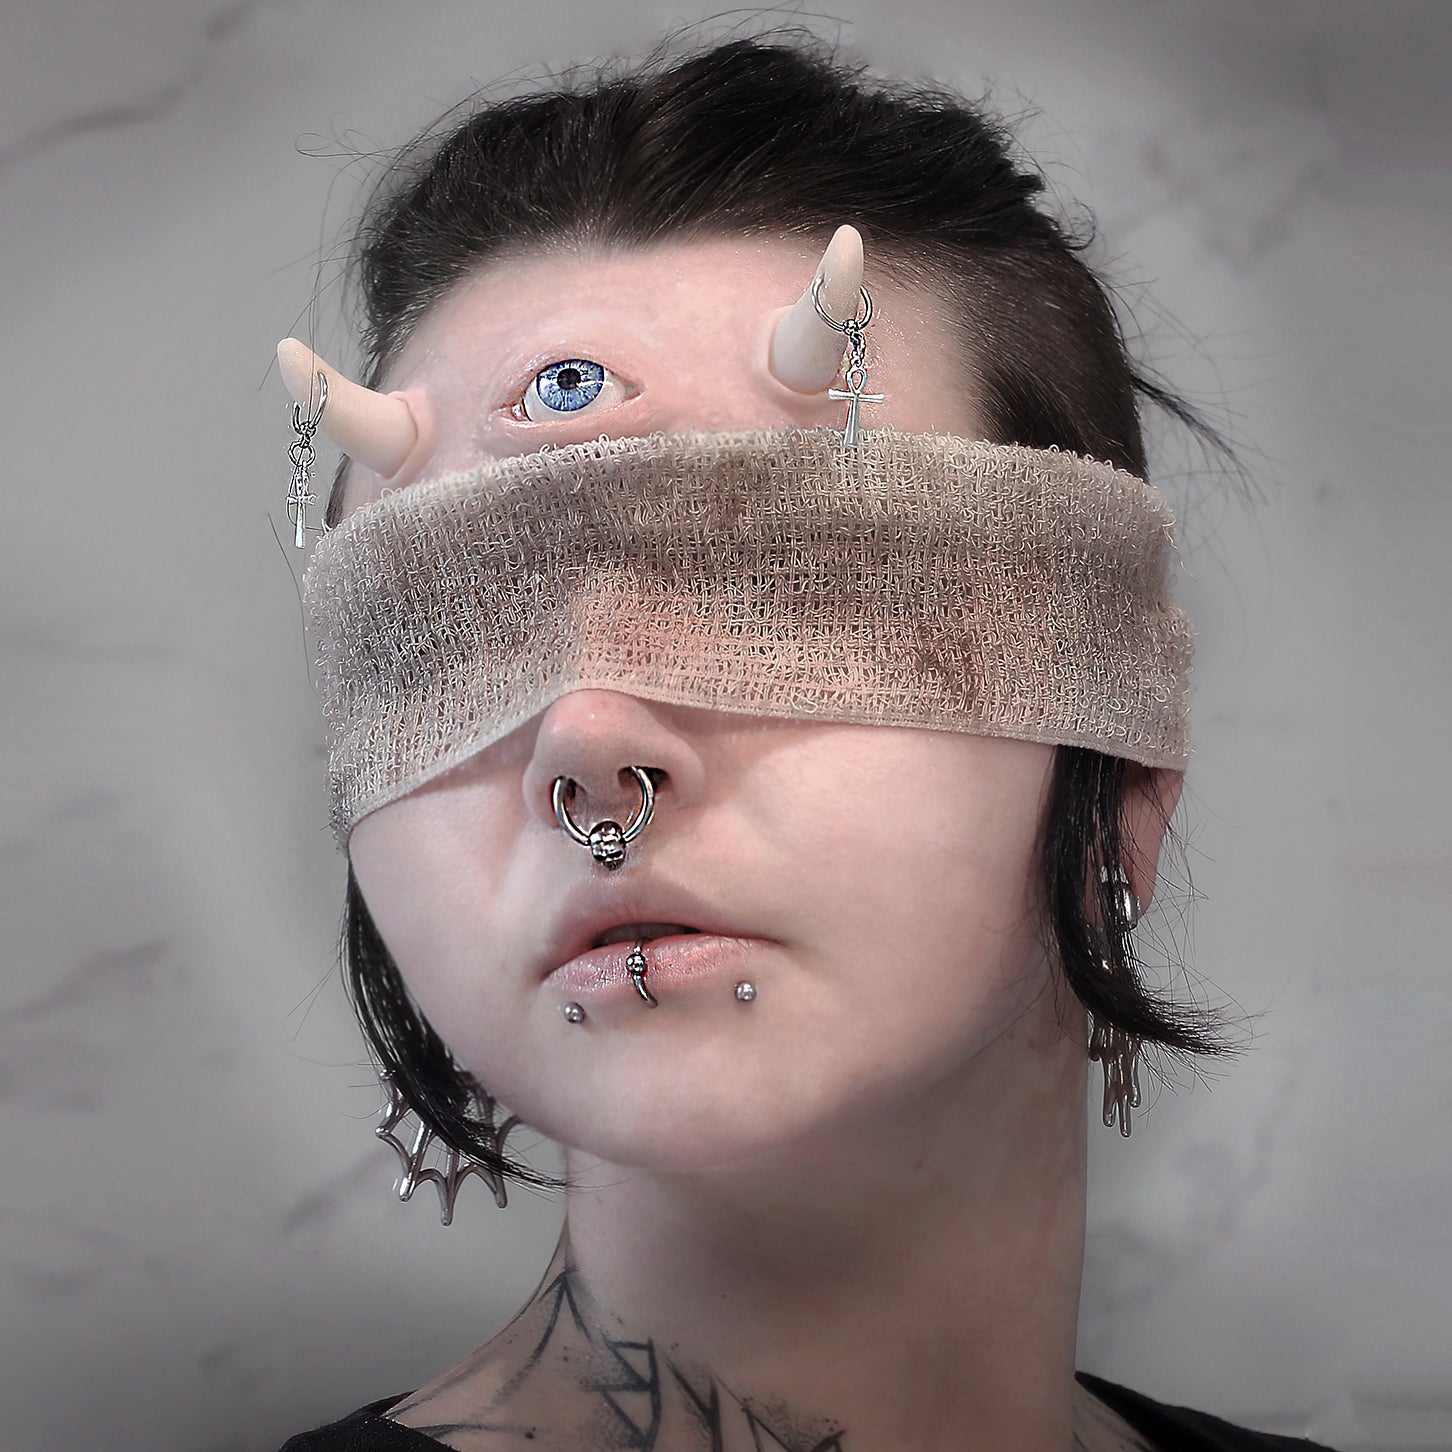 Woman in a blindfold wearing pierced horns and a third eye prosthetic